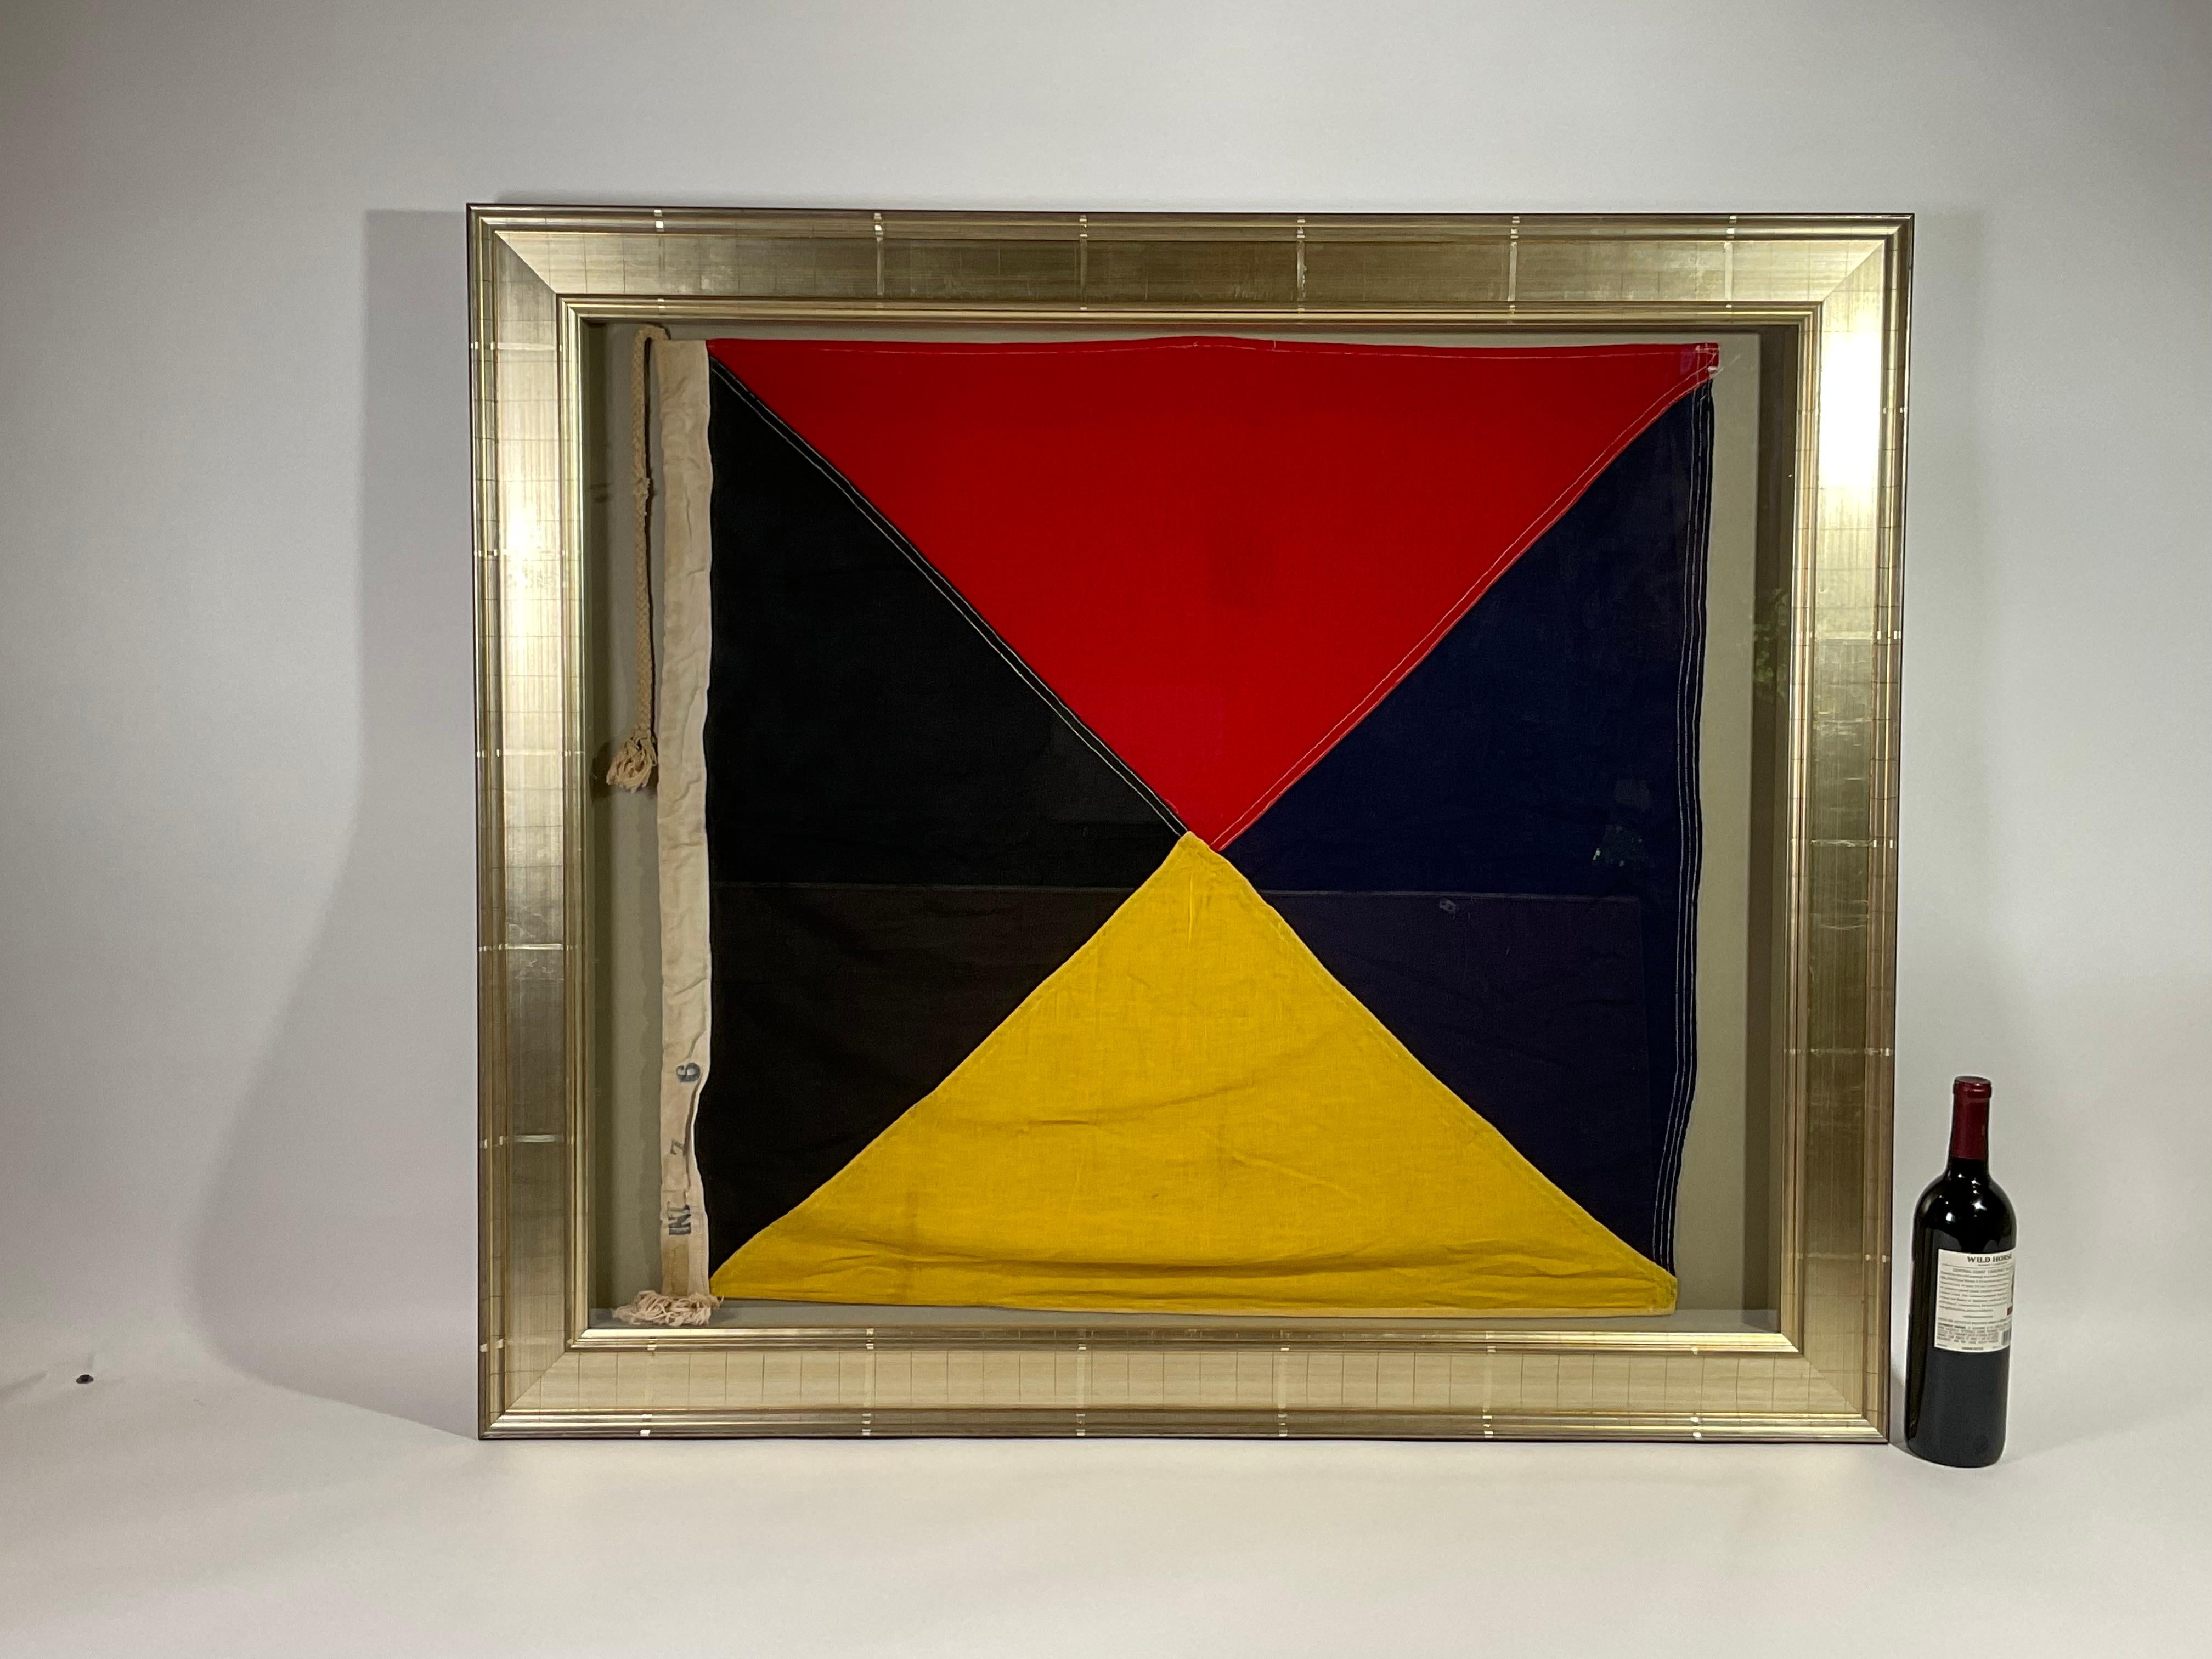 Framed maritime signal flag representing the letter “Z”, “ZULU” in the international code of signals. This authentic and ocean used pennant is made of individual panels of black, blue, red and yellow. Fitted to a heavy canvas hoist band with